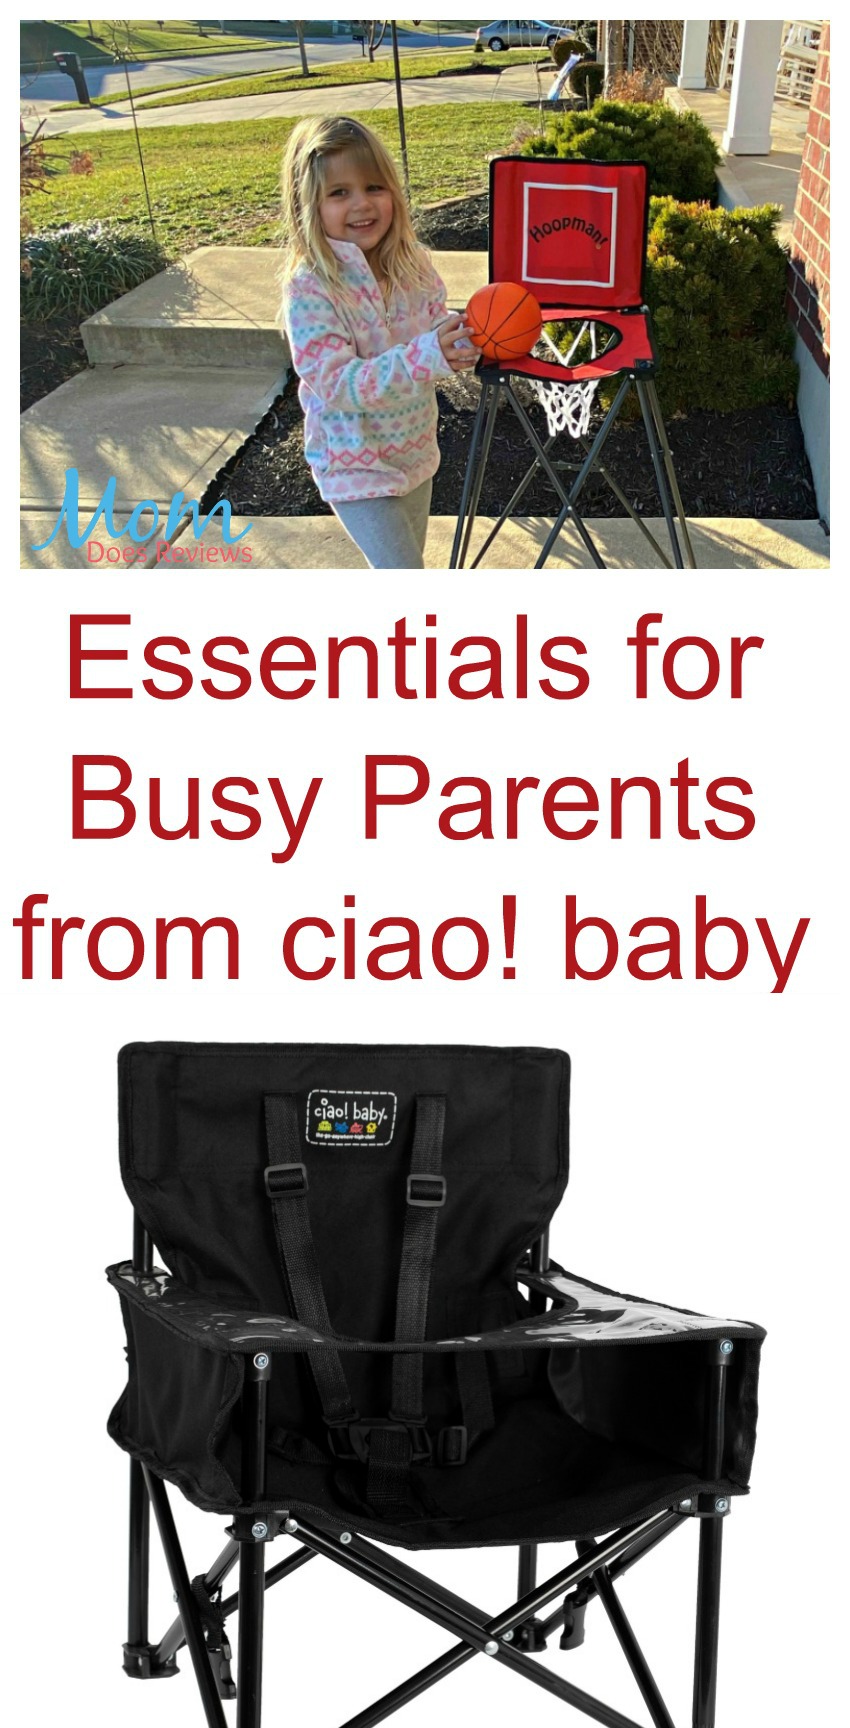 Essentials for Busy Parents from ciao! baby